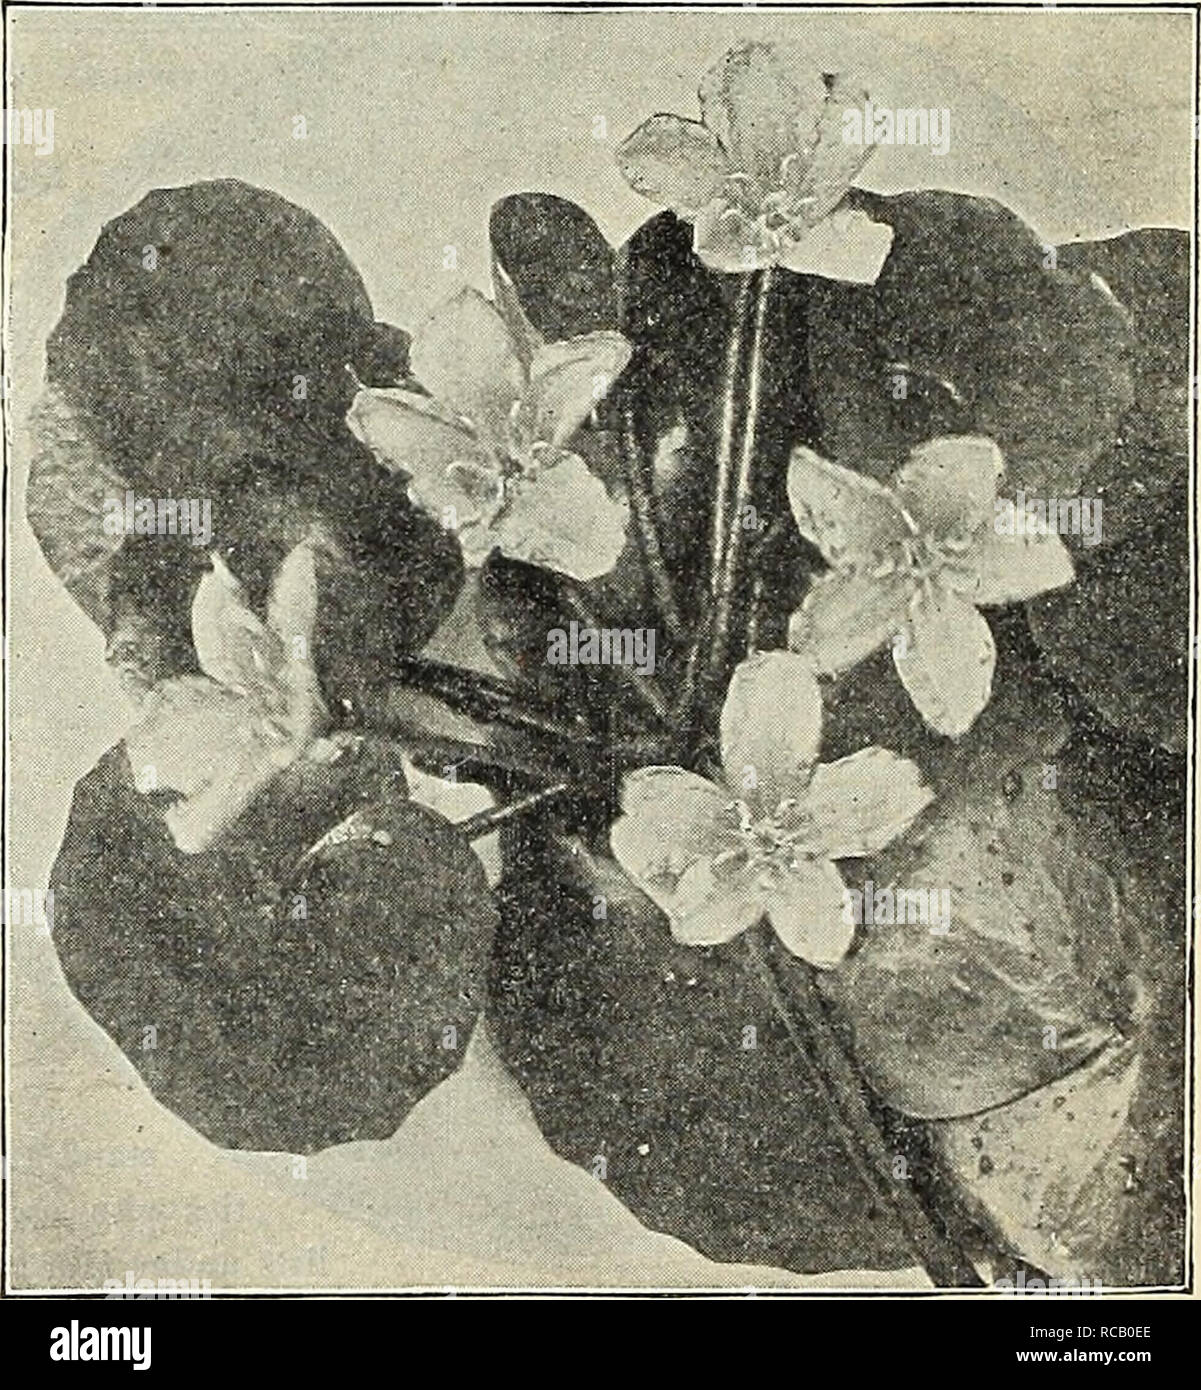 . Dreer's 1838 1908 garden book. Seeds Catalogs; Nursery stock Catalogs; Gardening Equipment and supplies Catalogs; Flowers Seeds Catalogs; Vegetables Seeds Catalogs; Fruit Seeds Catalogs. LlMNOCHRIS HUMBOLDTI (WatER PoPPY). (Offered on next Page.) Miscellaneous Aquatics. Stif a/so tiiuiey Aqiiarimn Planls on nextpa«e. AcoruS Japonica VarJegata {Variegated Sweet Flag). One of Uie nnest variei^'ated plants in cultivation. 25 cts. each ; $2 50 per doz. — Qrarnineus VariegatuS. Dwarf-growing with leathery leaves, beautifully maigined with white; handsome plant for margins or pot culture. 20 cts. Stock Photo